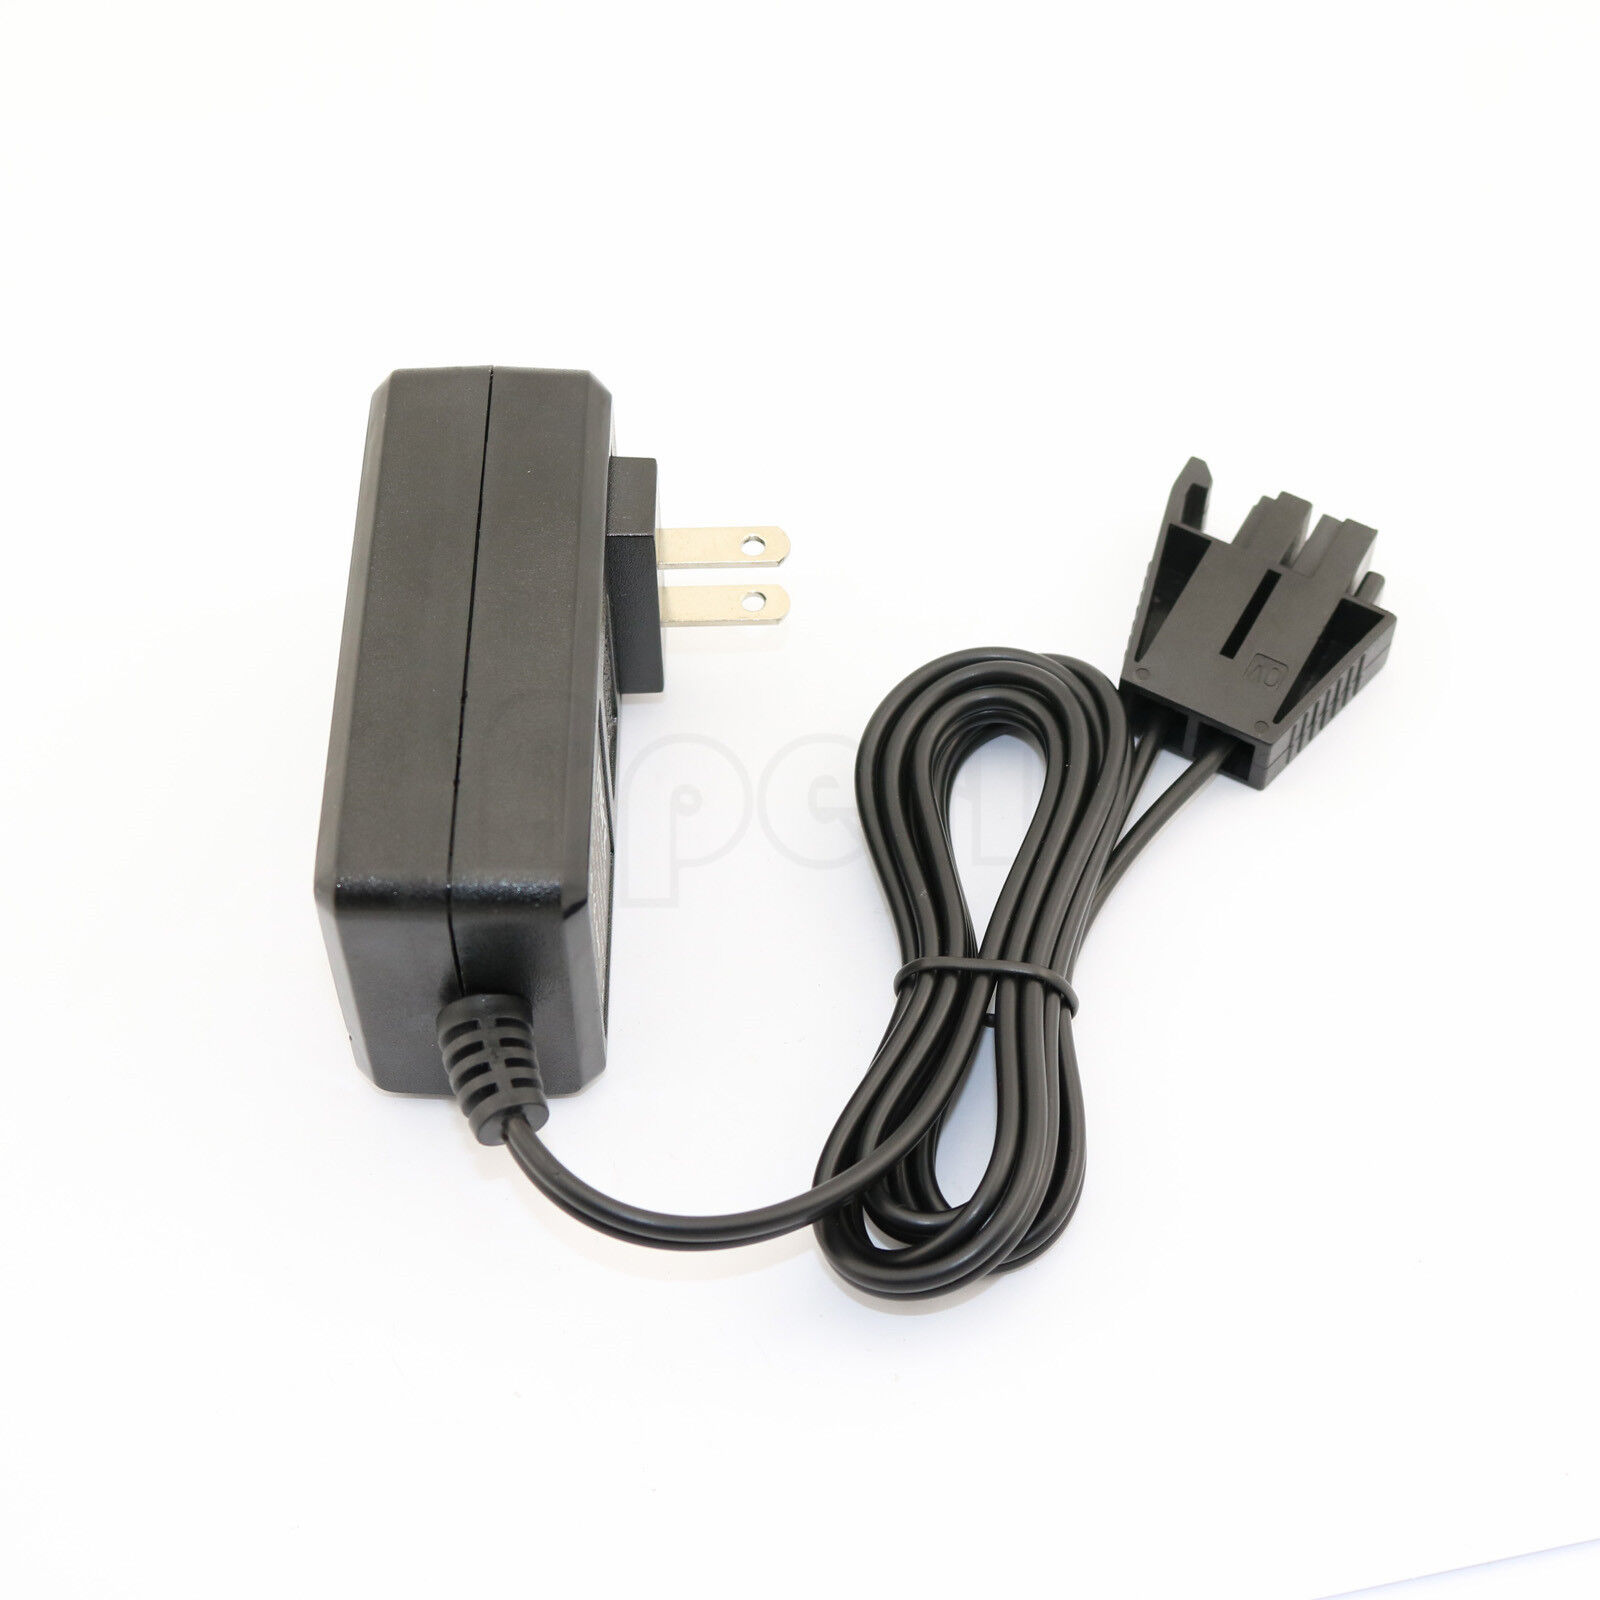 *Brand NEW*BATTERY CHARGER For PEG PEREGO RIDE ON TOYS 6 VOLT 6 V AC POWER ADAPTER - Click Image to Close